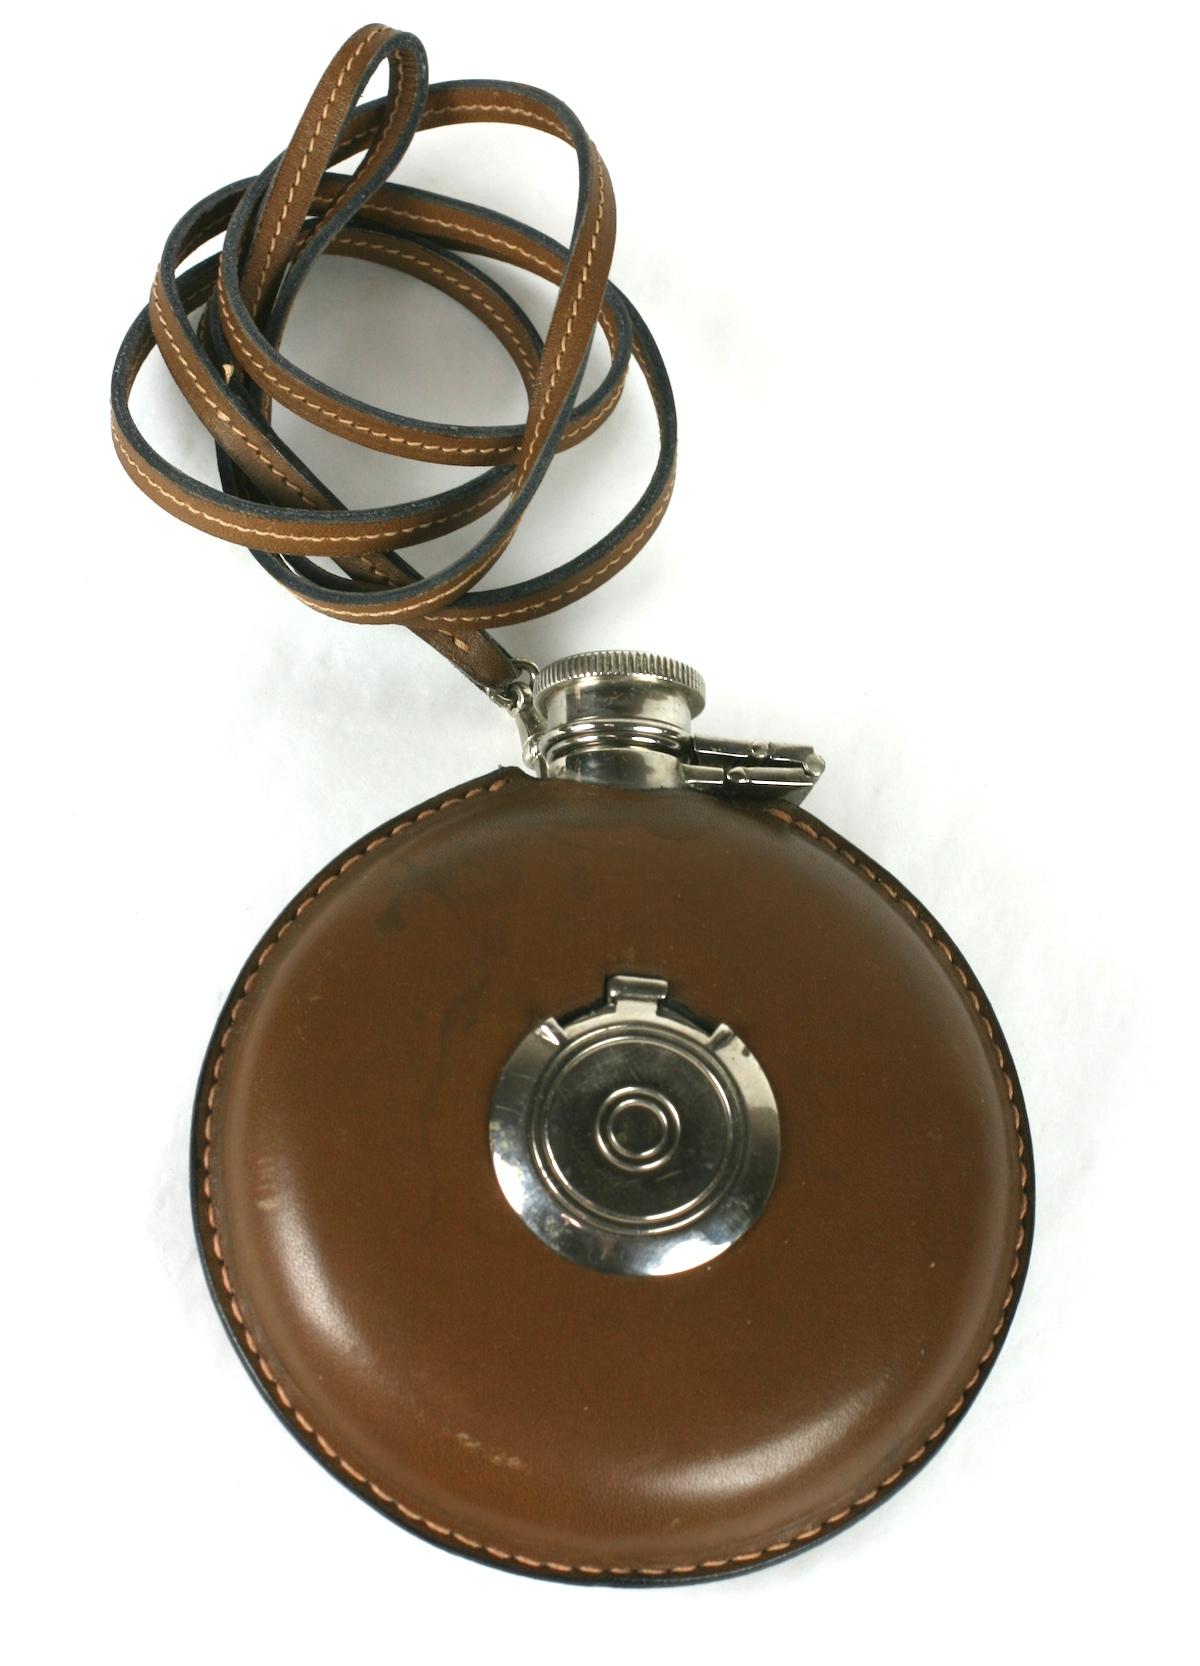 Gucci Leather Clad Flask from the 1970's with lariat to be worn as accessory.  Beautifully constructed of leather clad metal with screw off cap. Flask is detachable from lariat. Flask measures 4.25